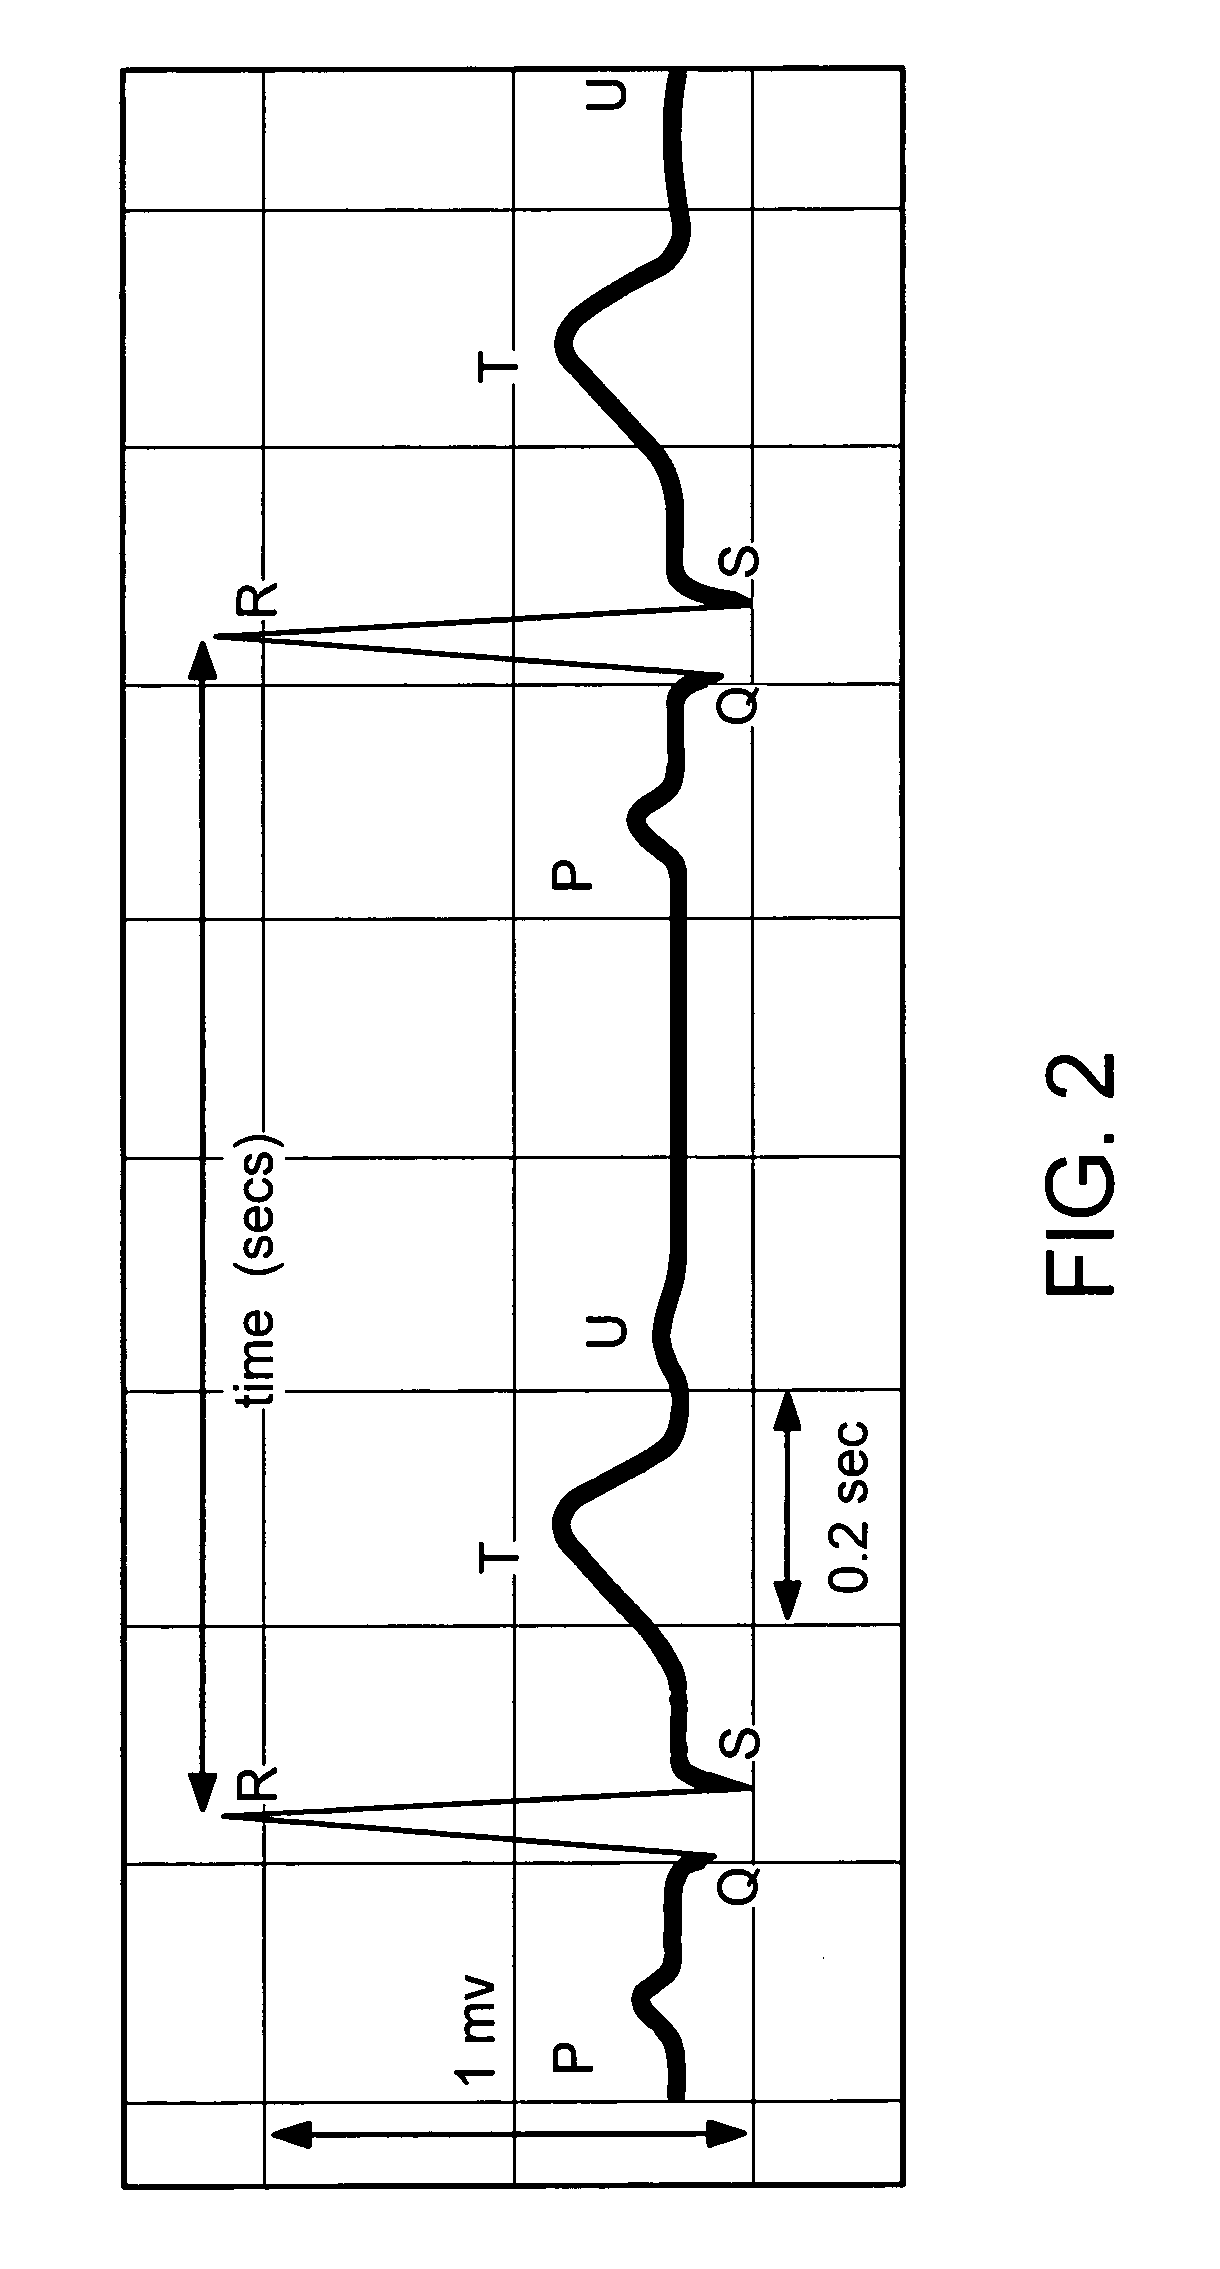 Method and system for detecting premature ventricular contraction from a surface electrocardiogram